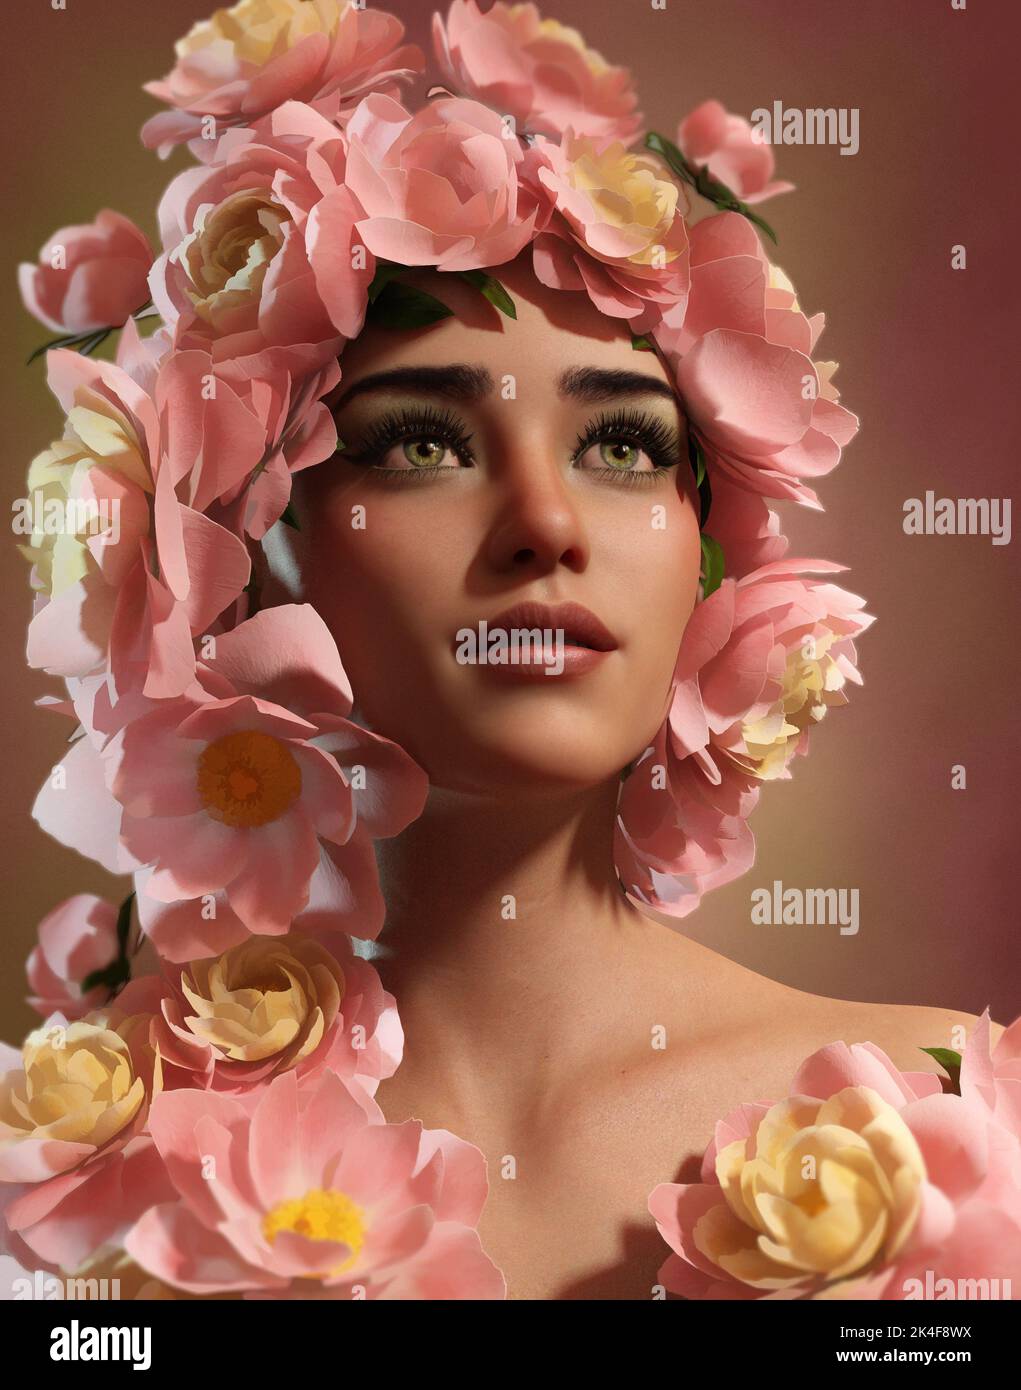 3d computer graphics of a beauty with flower decoration on the head Stock Photo